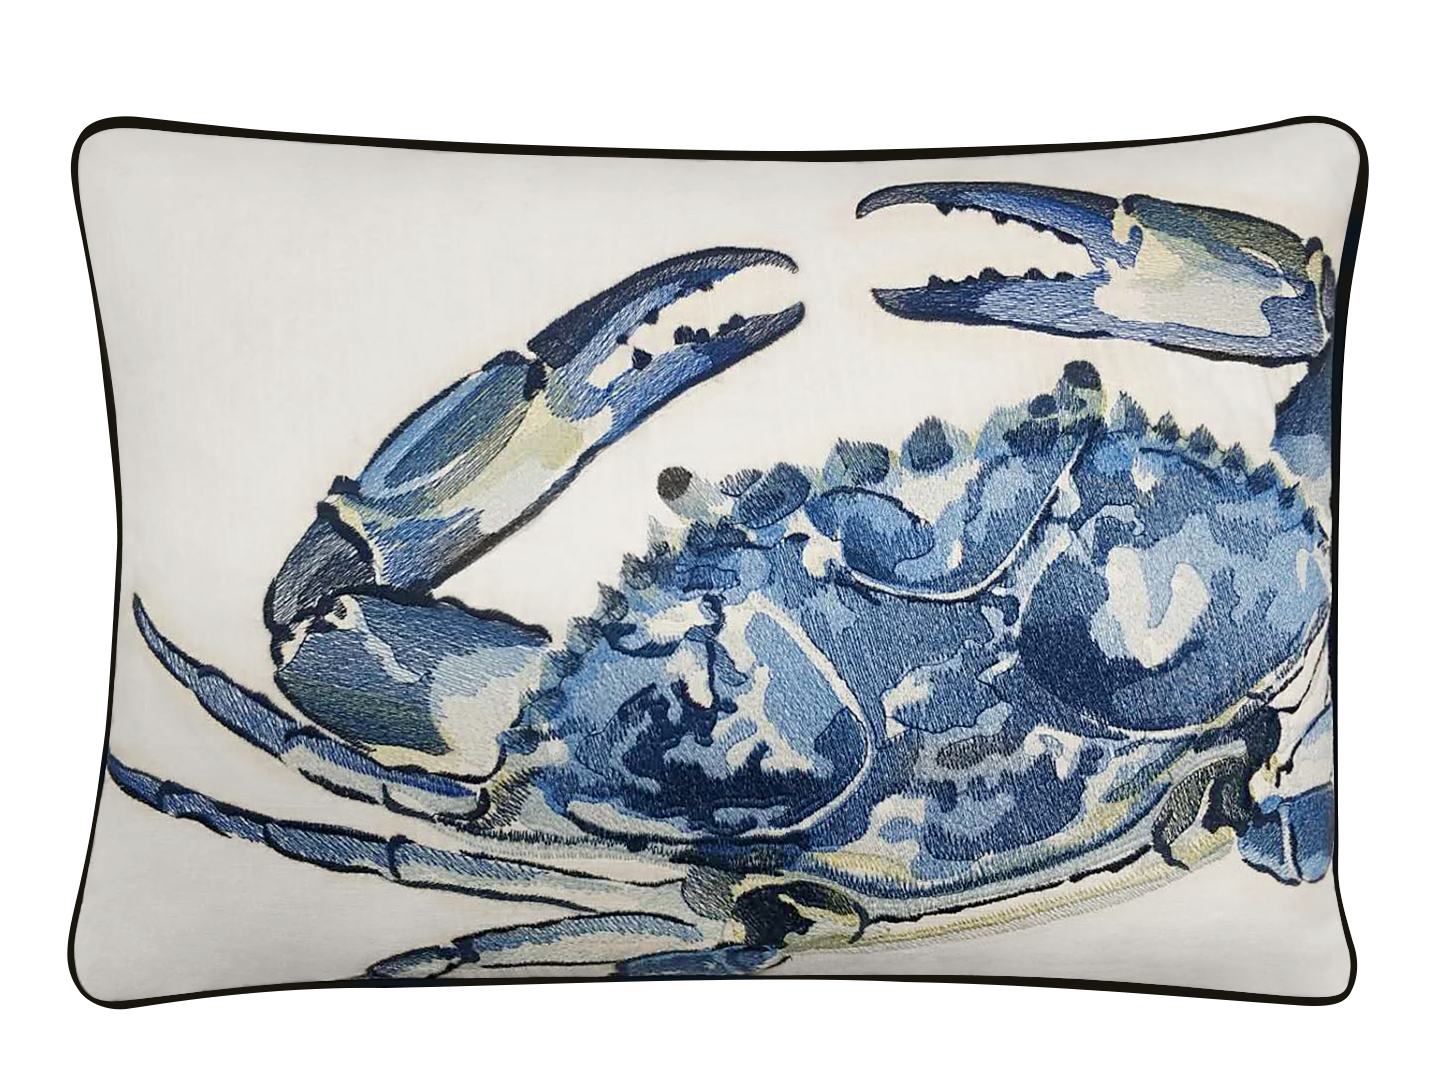 Blue Crab Embroidered Pillow Cover